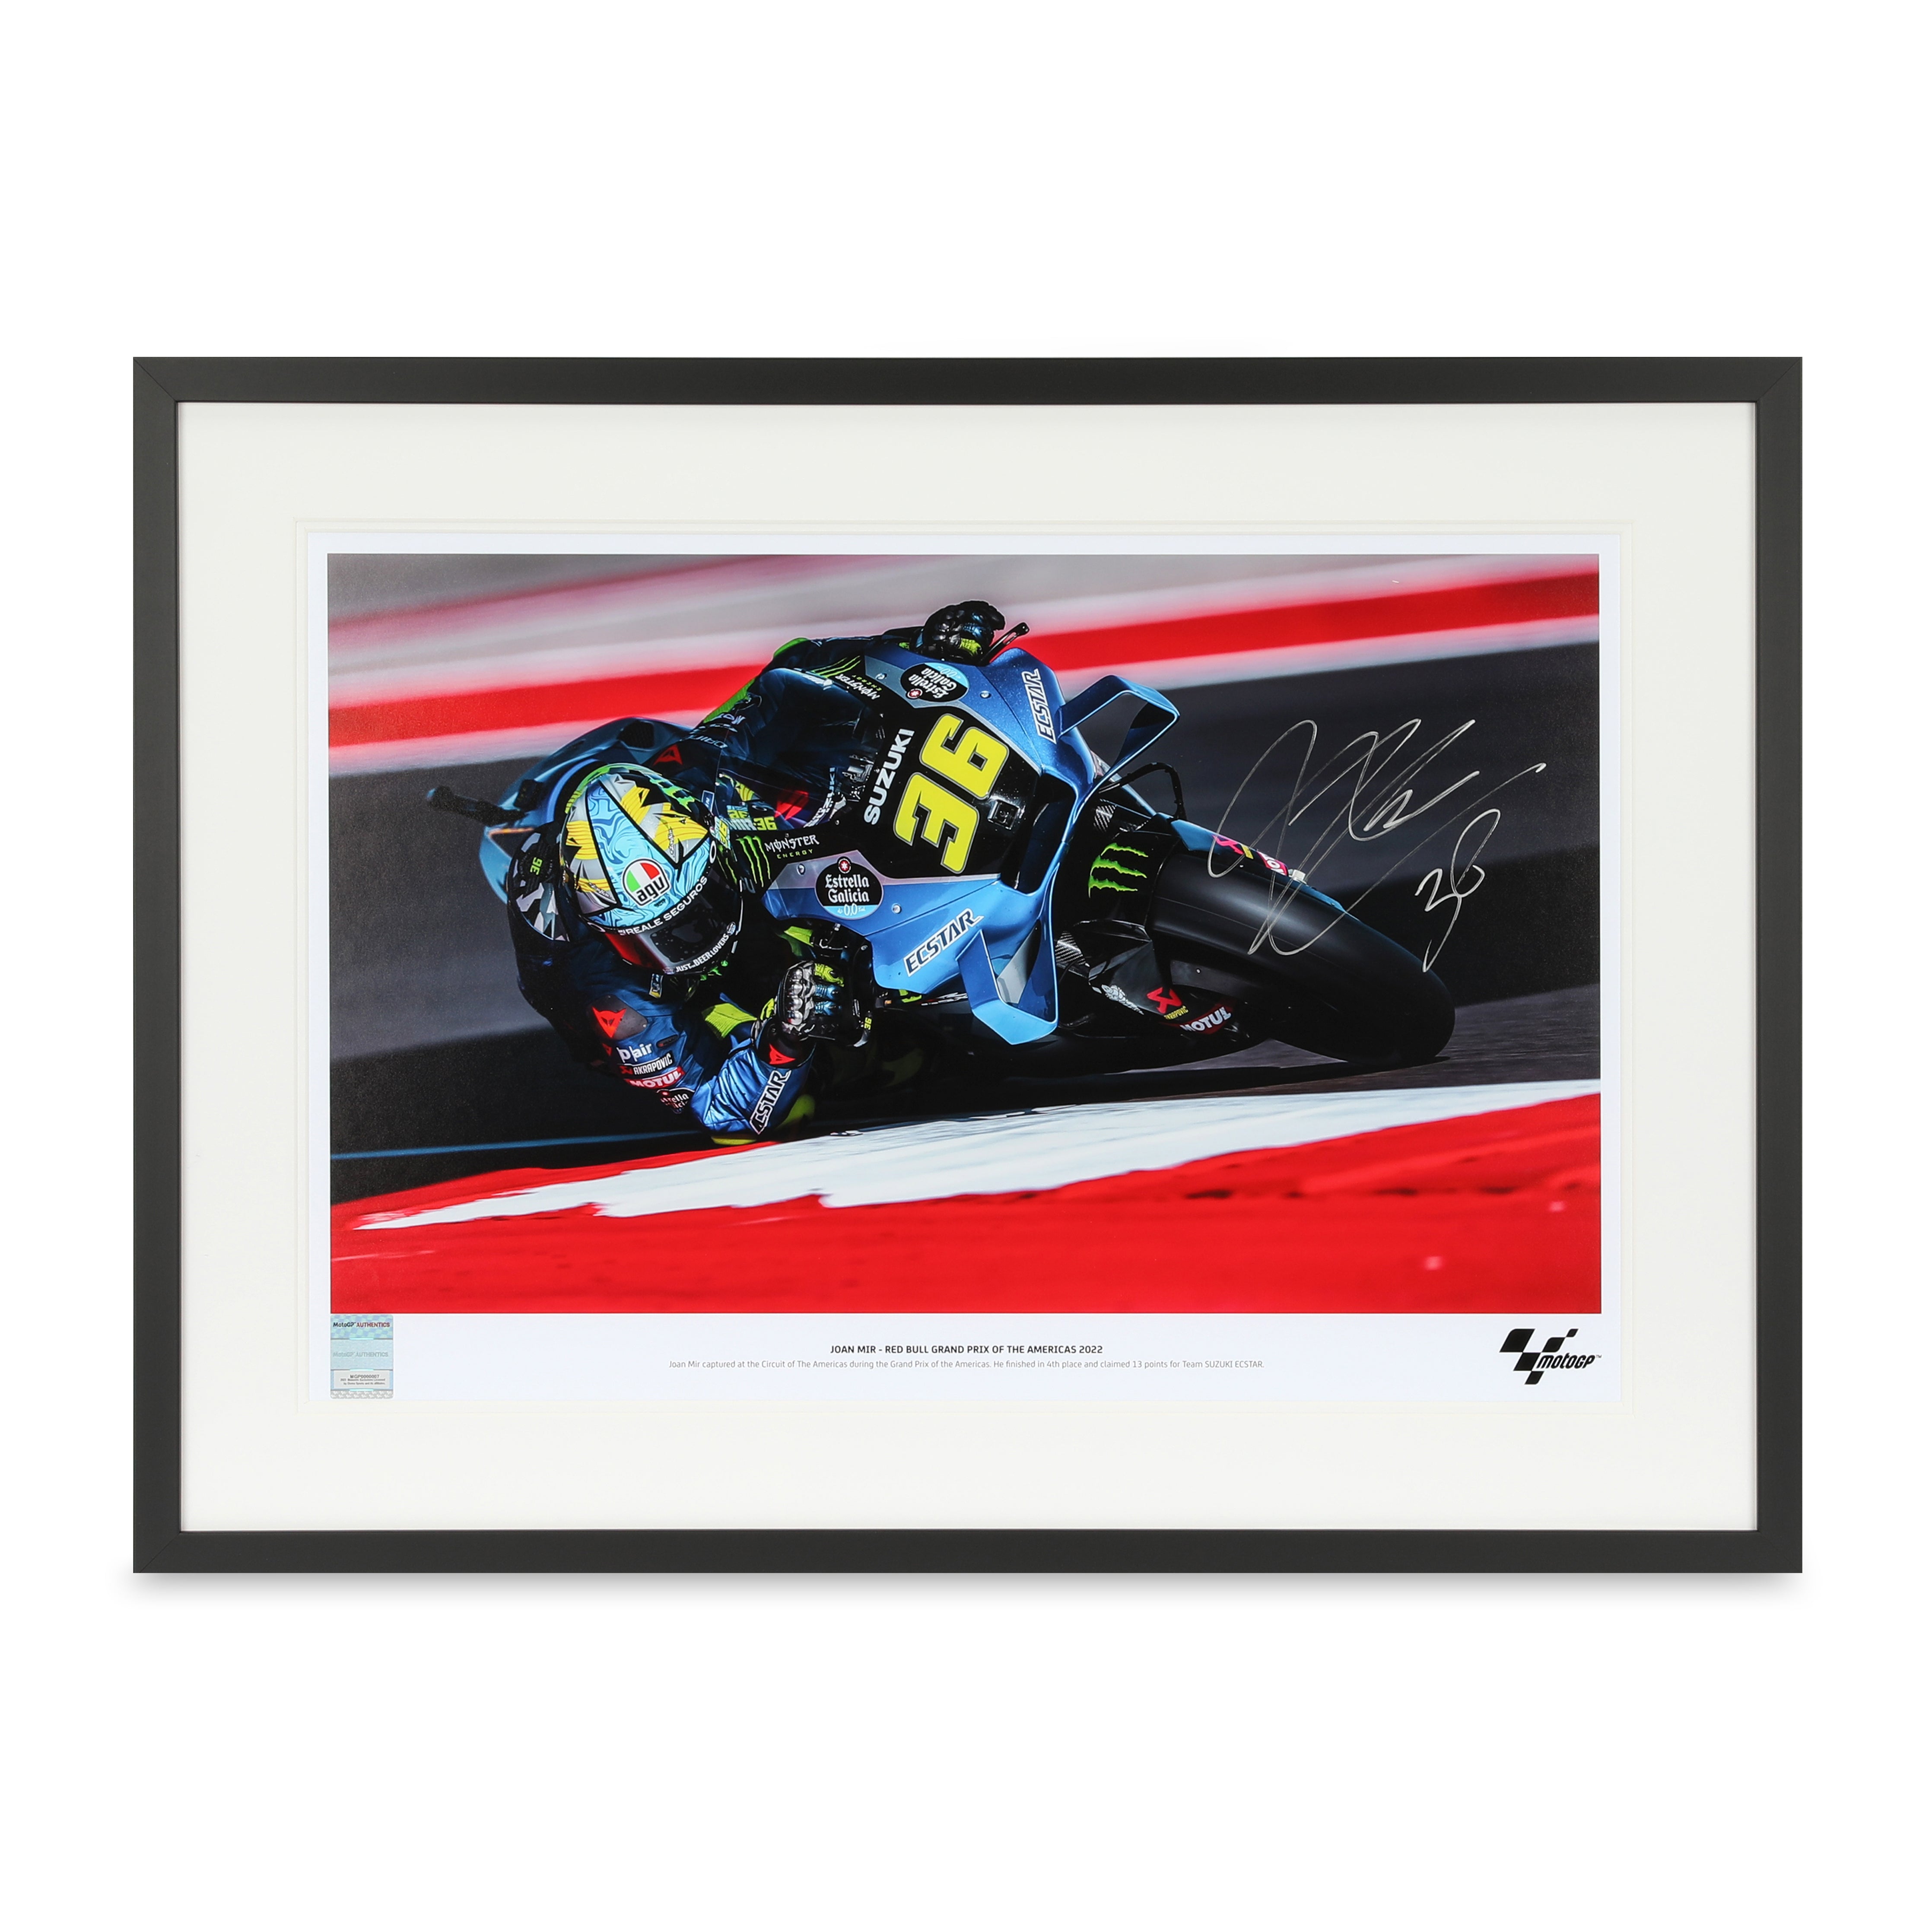 Joan Mir Signed 2022 Grand Prix of the Americas Photo - Polarity Photo